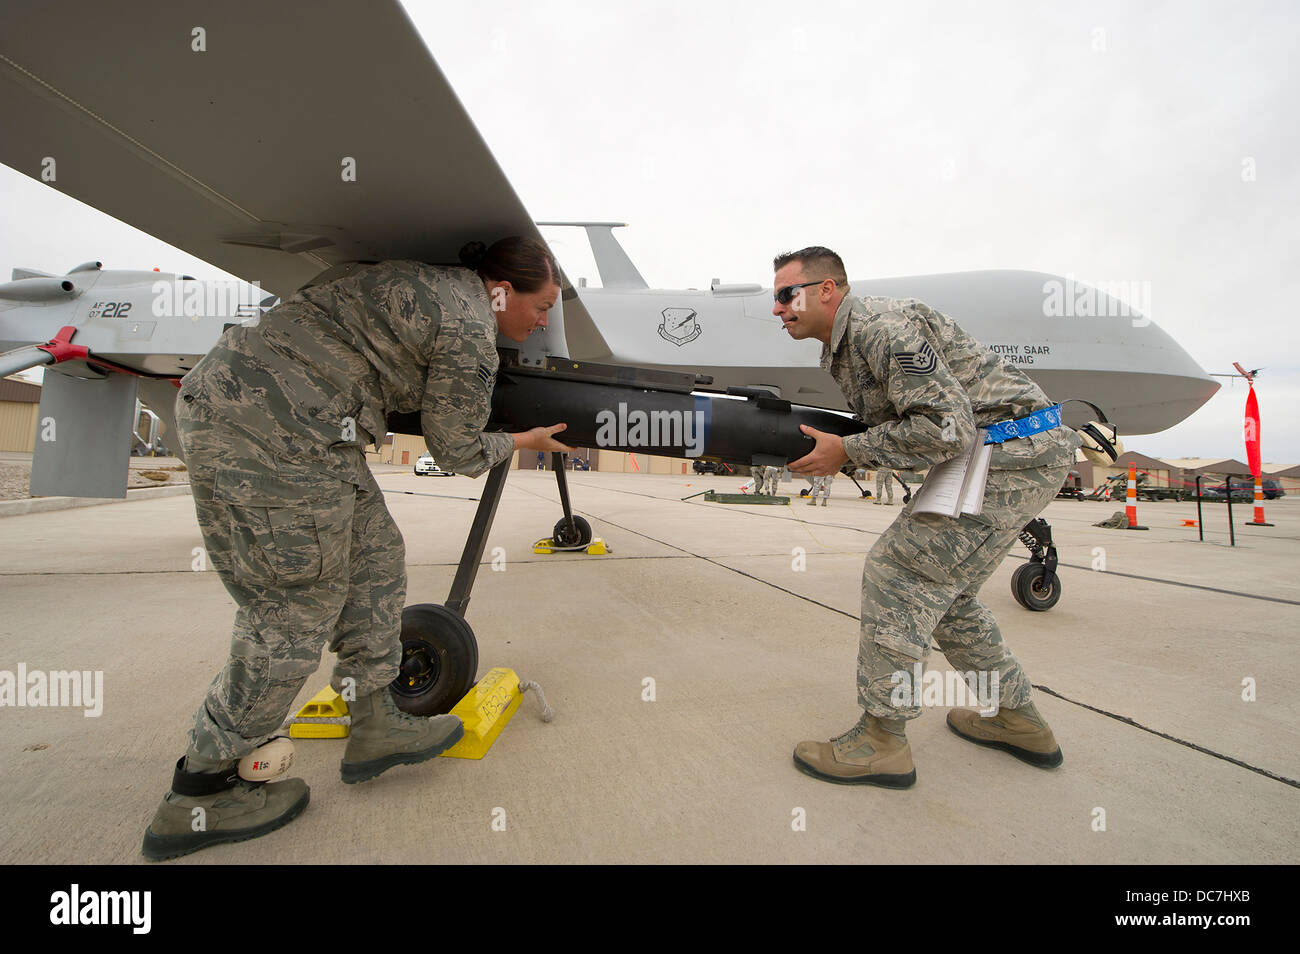 US Air Force airmen load a missile onto a MQ-1 Predator unmanned aerial drone April 5, 2013 at Holloman Air Force Base, NM. Stock Photo